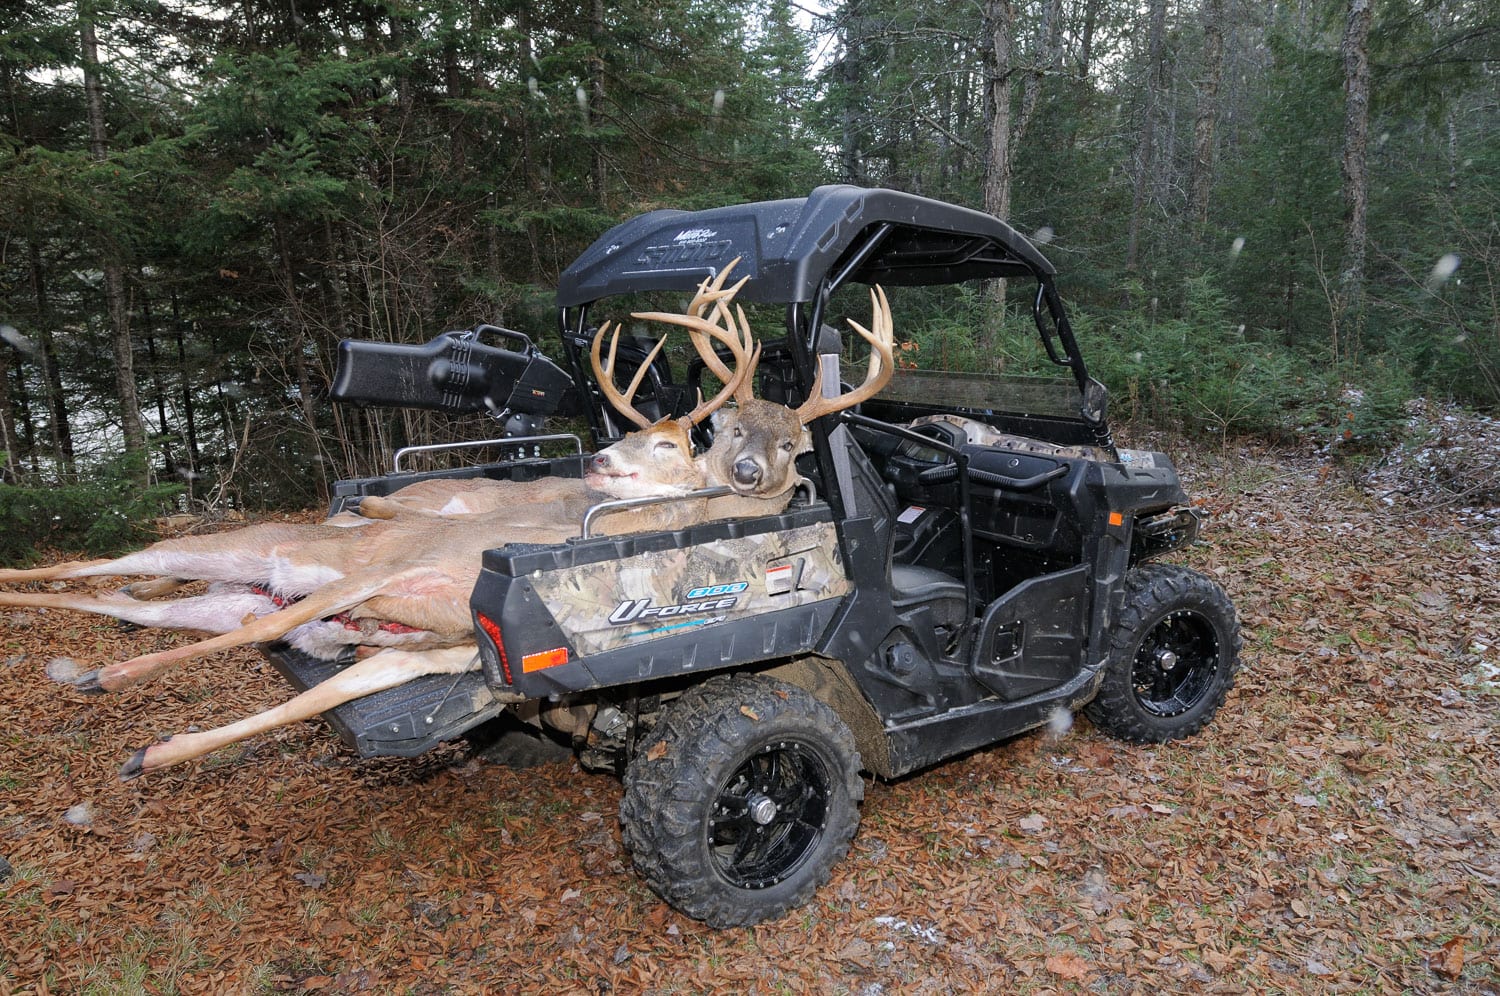 Some Tips To Make You a Better White-Tailed Deer Hunter